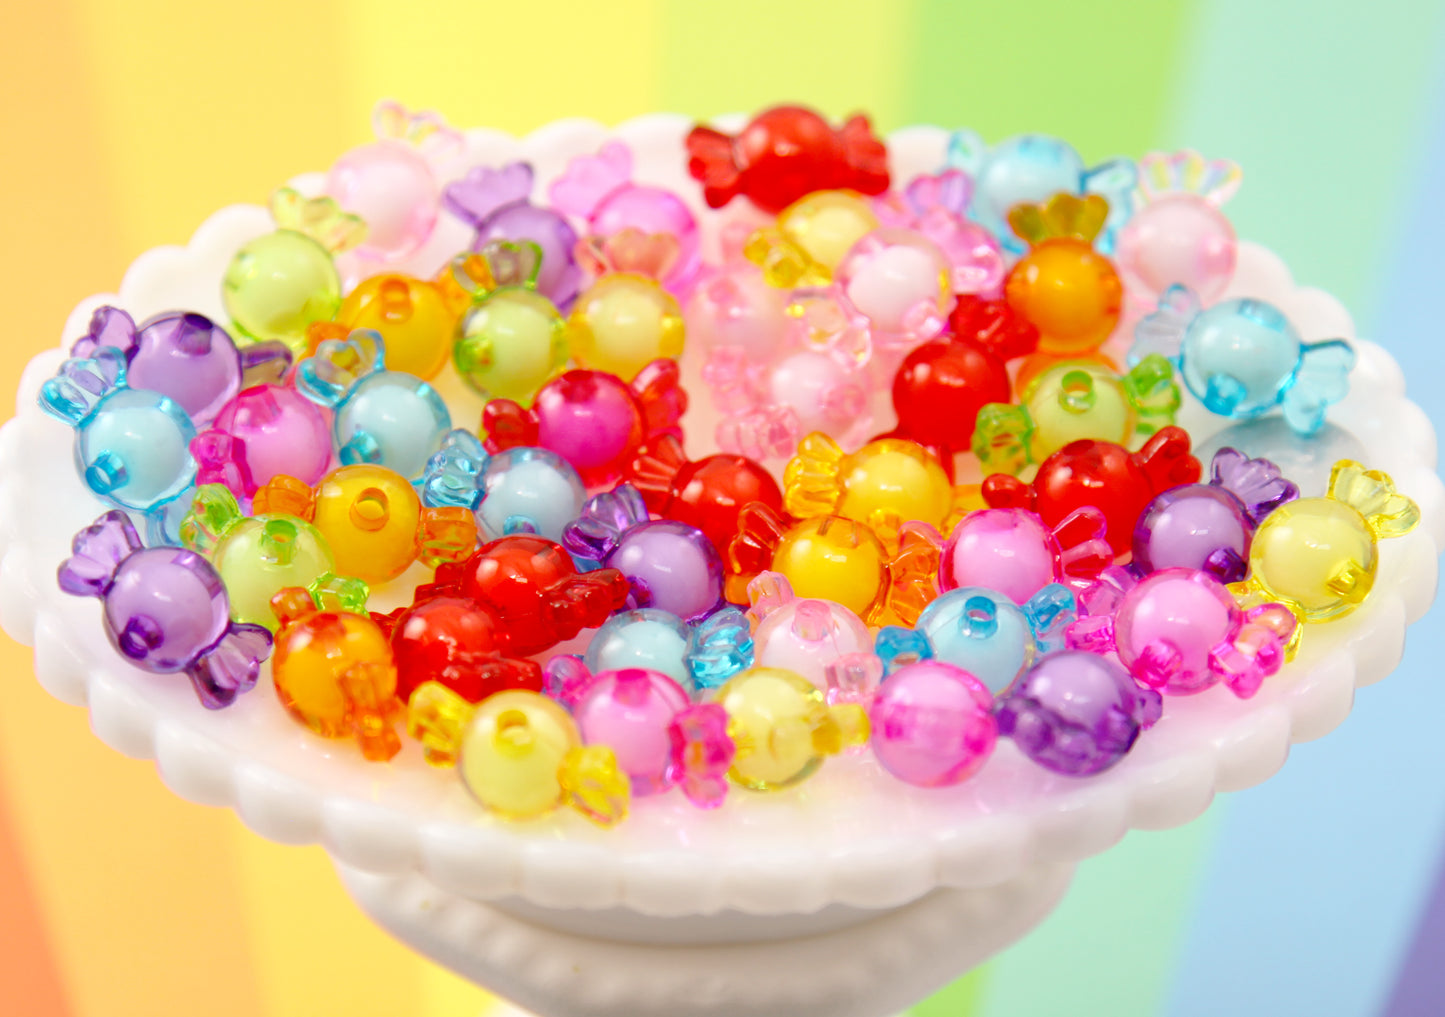 Candy Beads - 22mm Small Candy Shape Acrylic or Resin Beads - 30 pc set